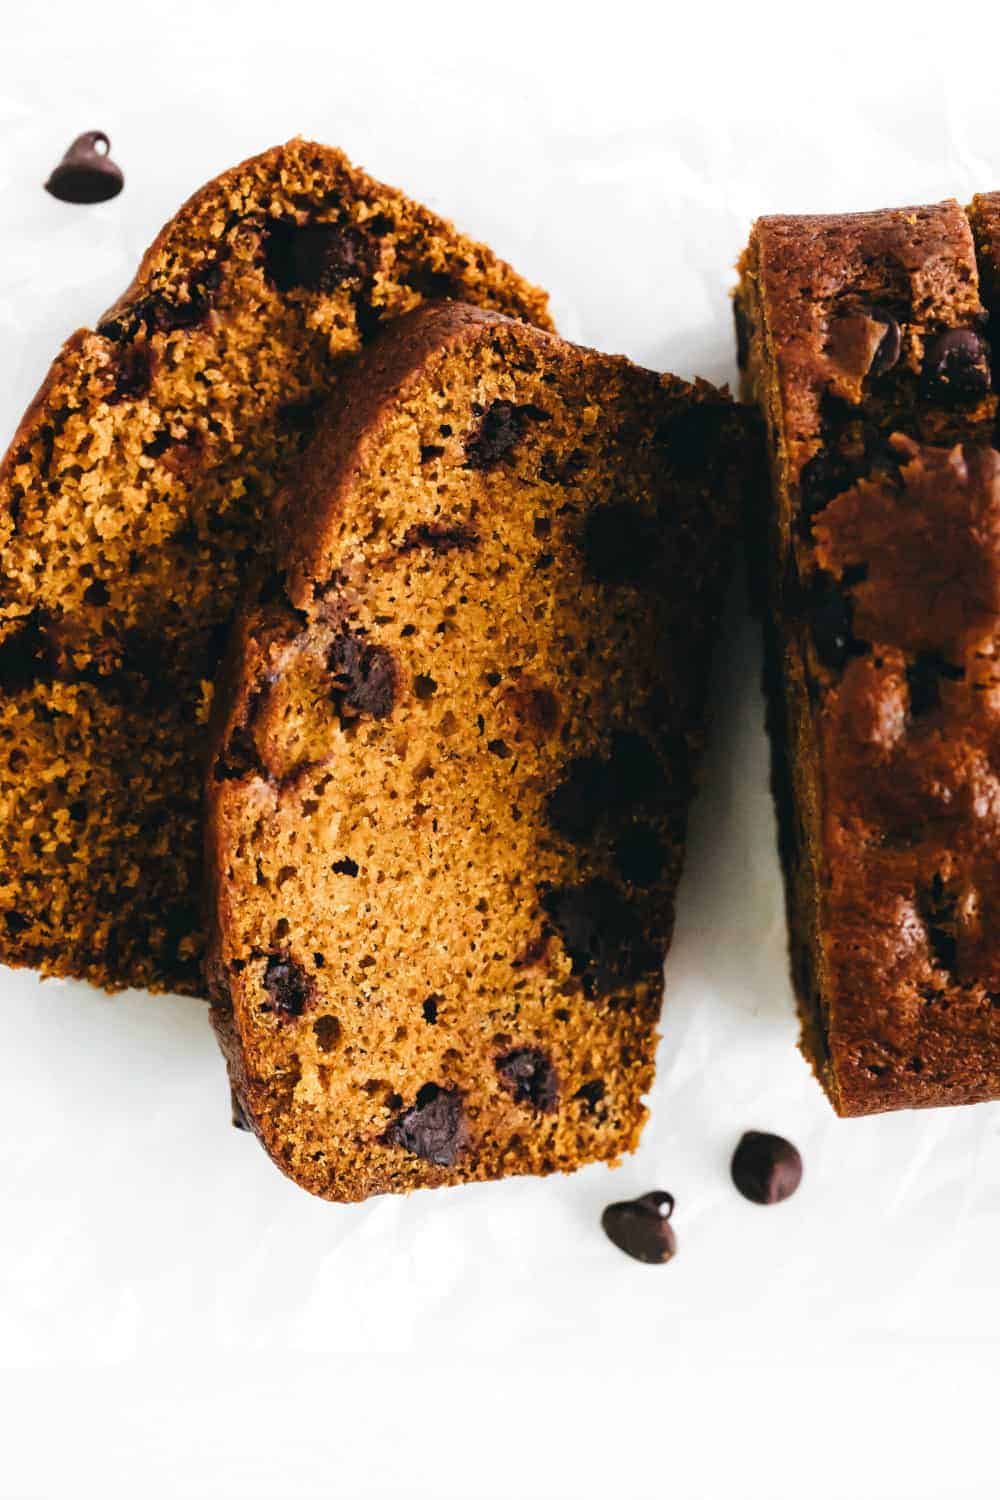 Sliced loaf of pumpkin chocolate chip bread on a light surface